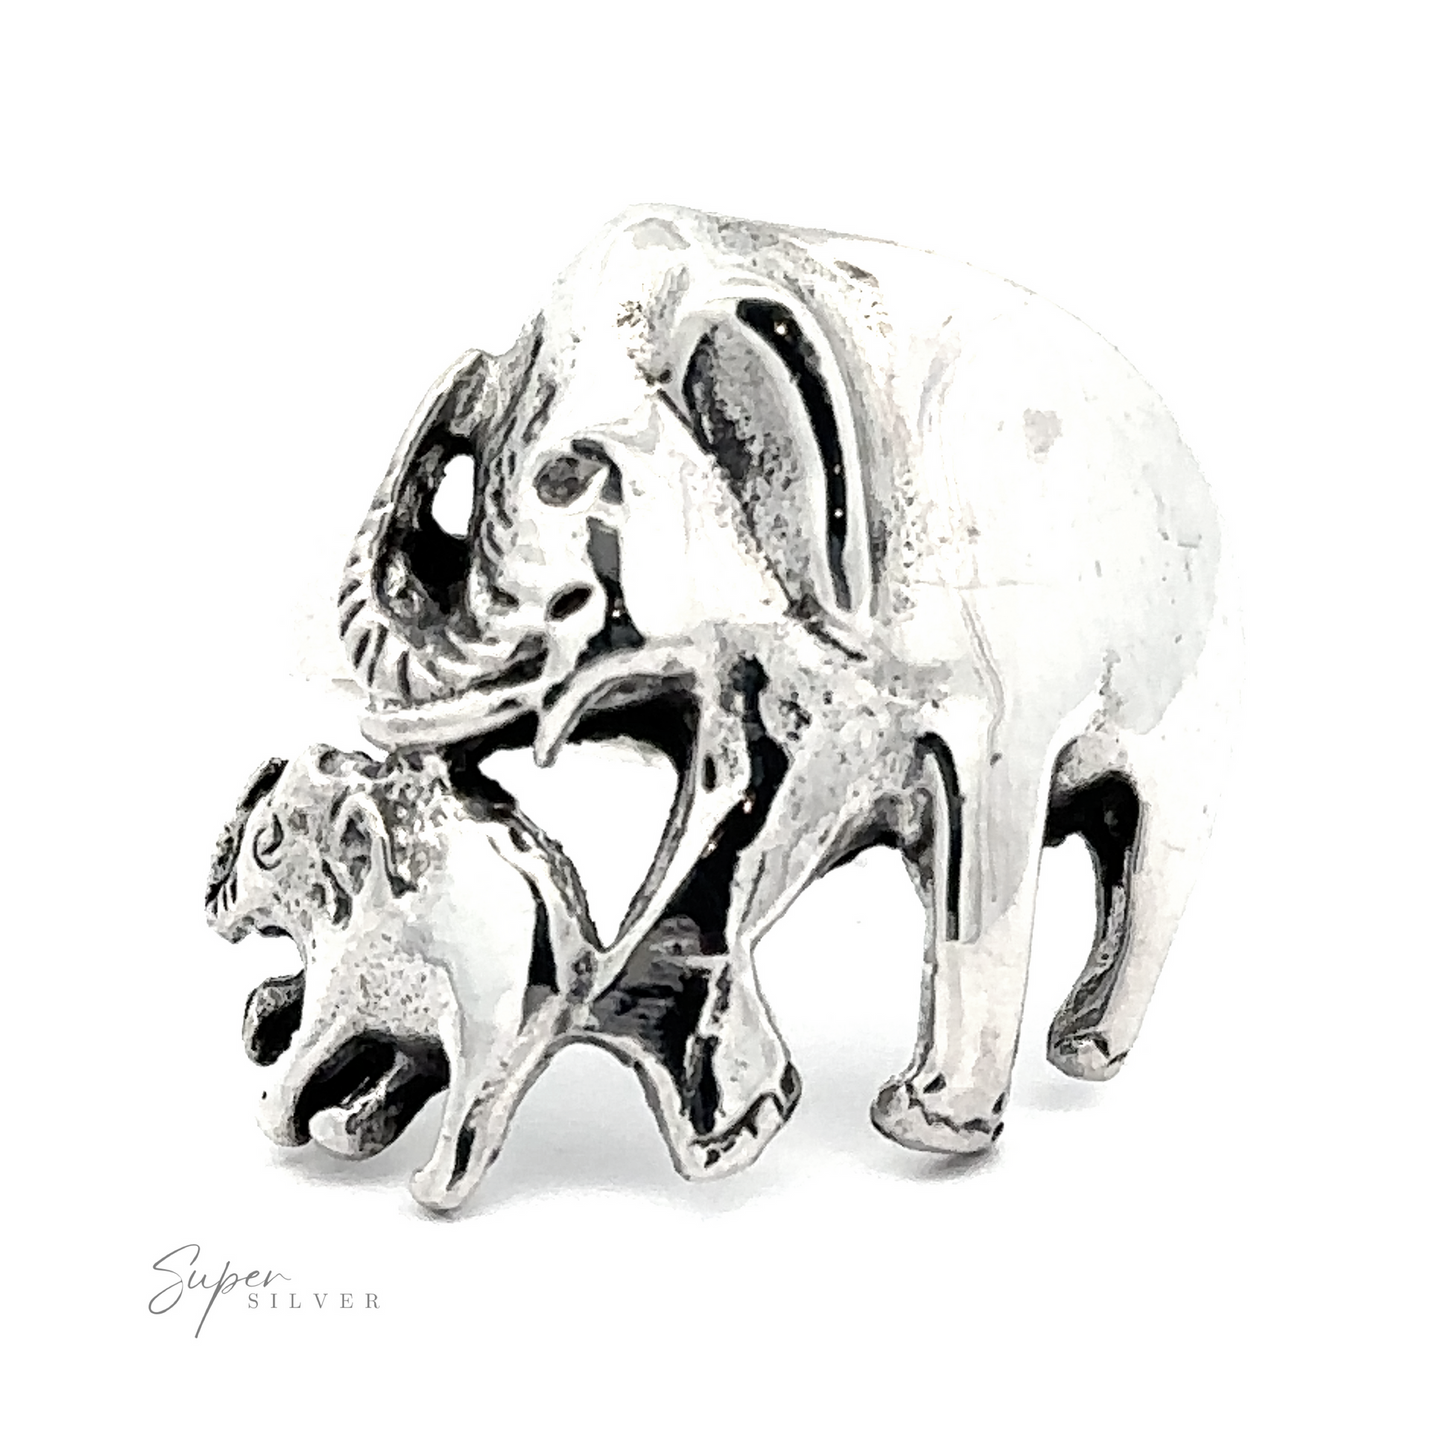 A Silver Elephant and Calf Ring with intricate design details, isolated on a white background with a watermark reading "super silver.